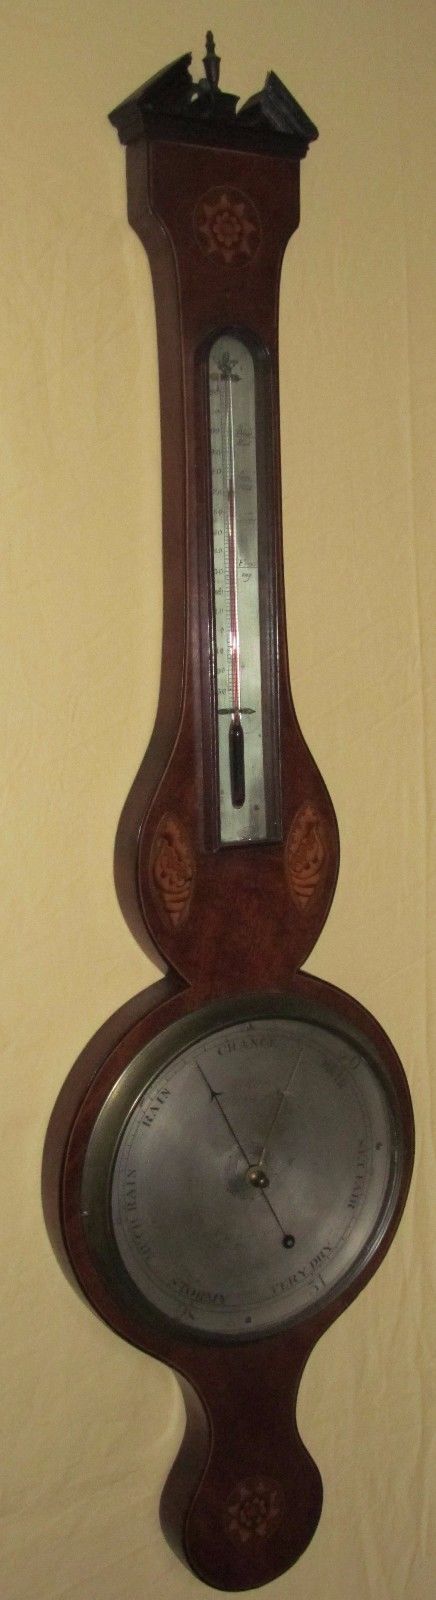 FINELY INLAID EARLY 19TH CENTURY BAROMETER WITH CONCH SHELLS & SEA ANEMONE